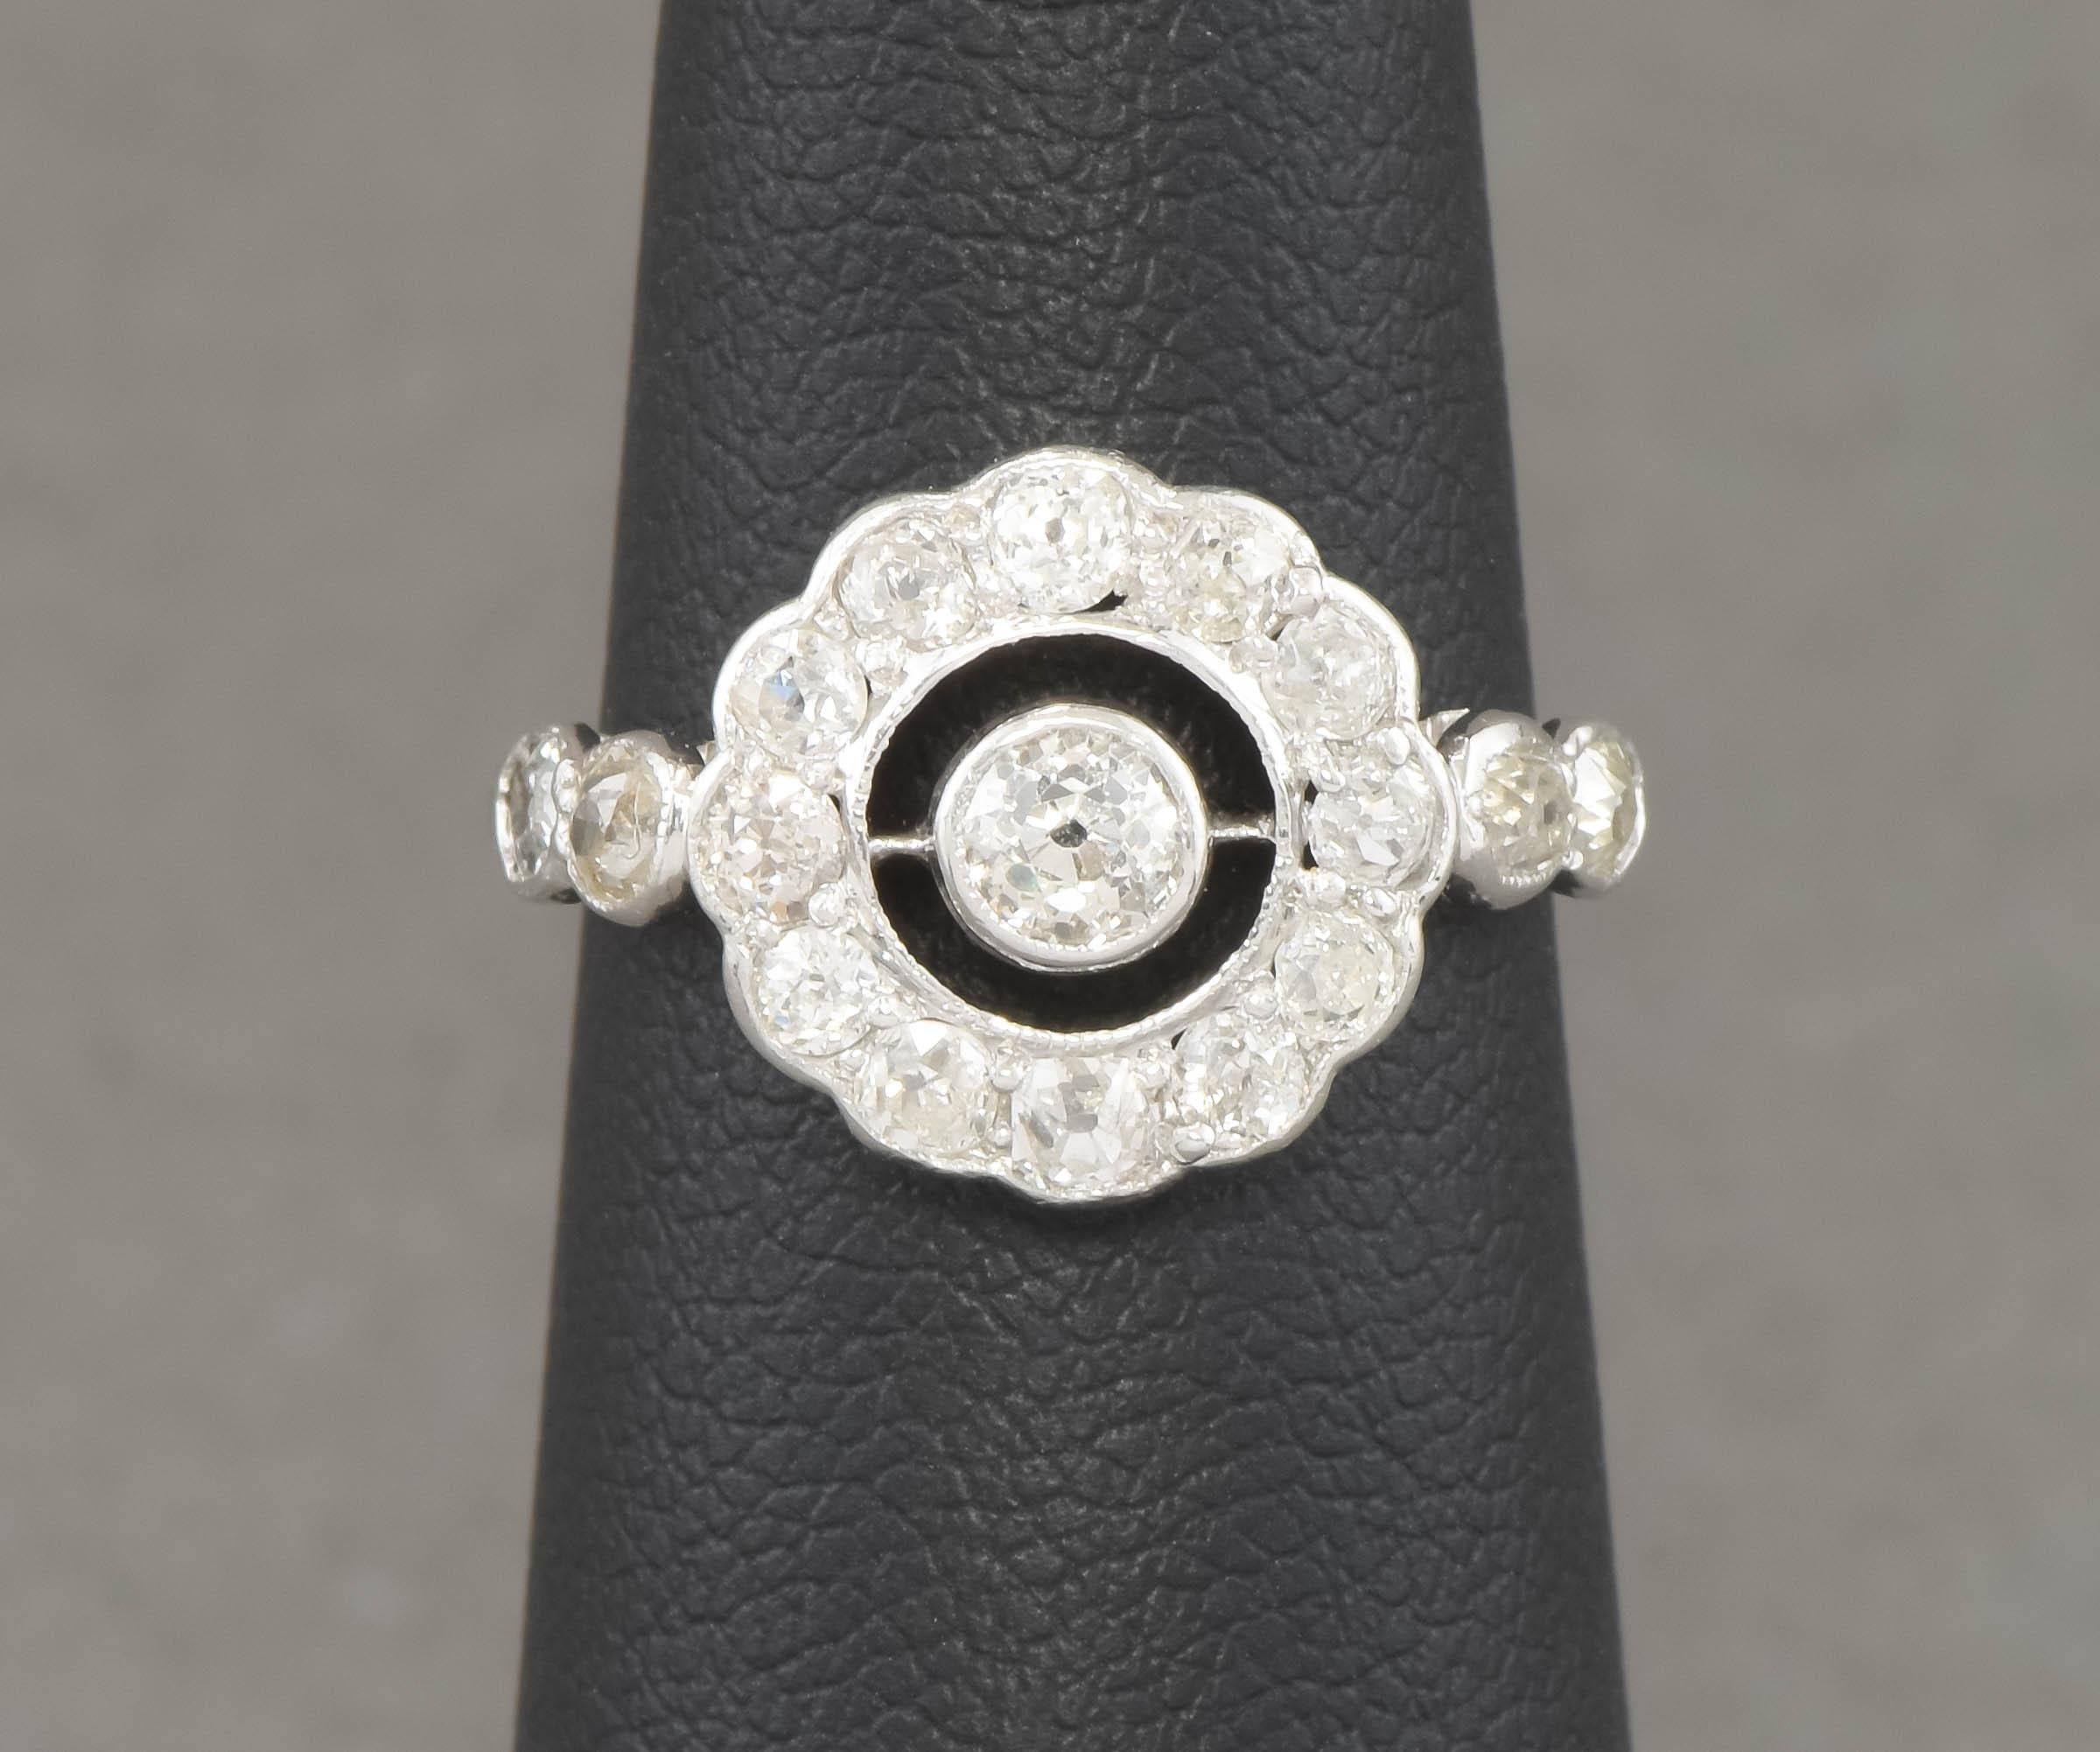 Offered is a charming and very fiery 1930's Art Deco diamond engagement ring with a wonderful Target, Halo, flower or 